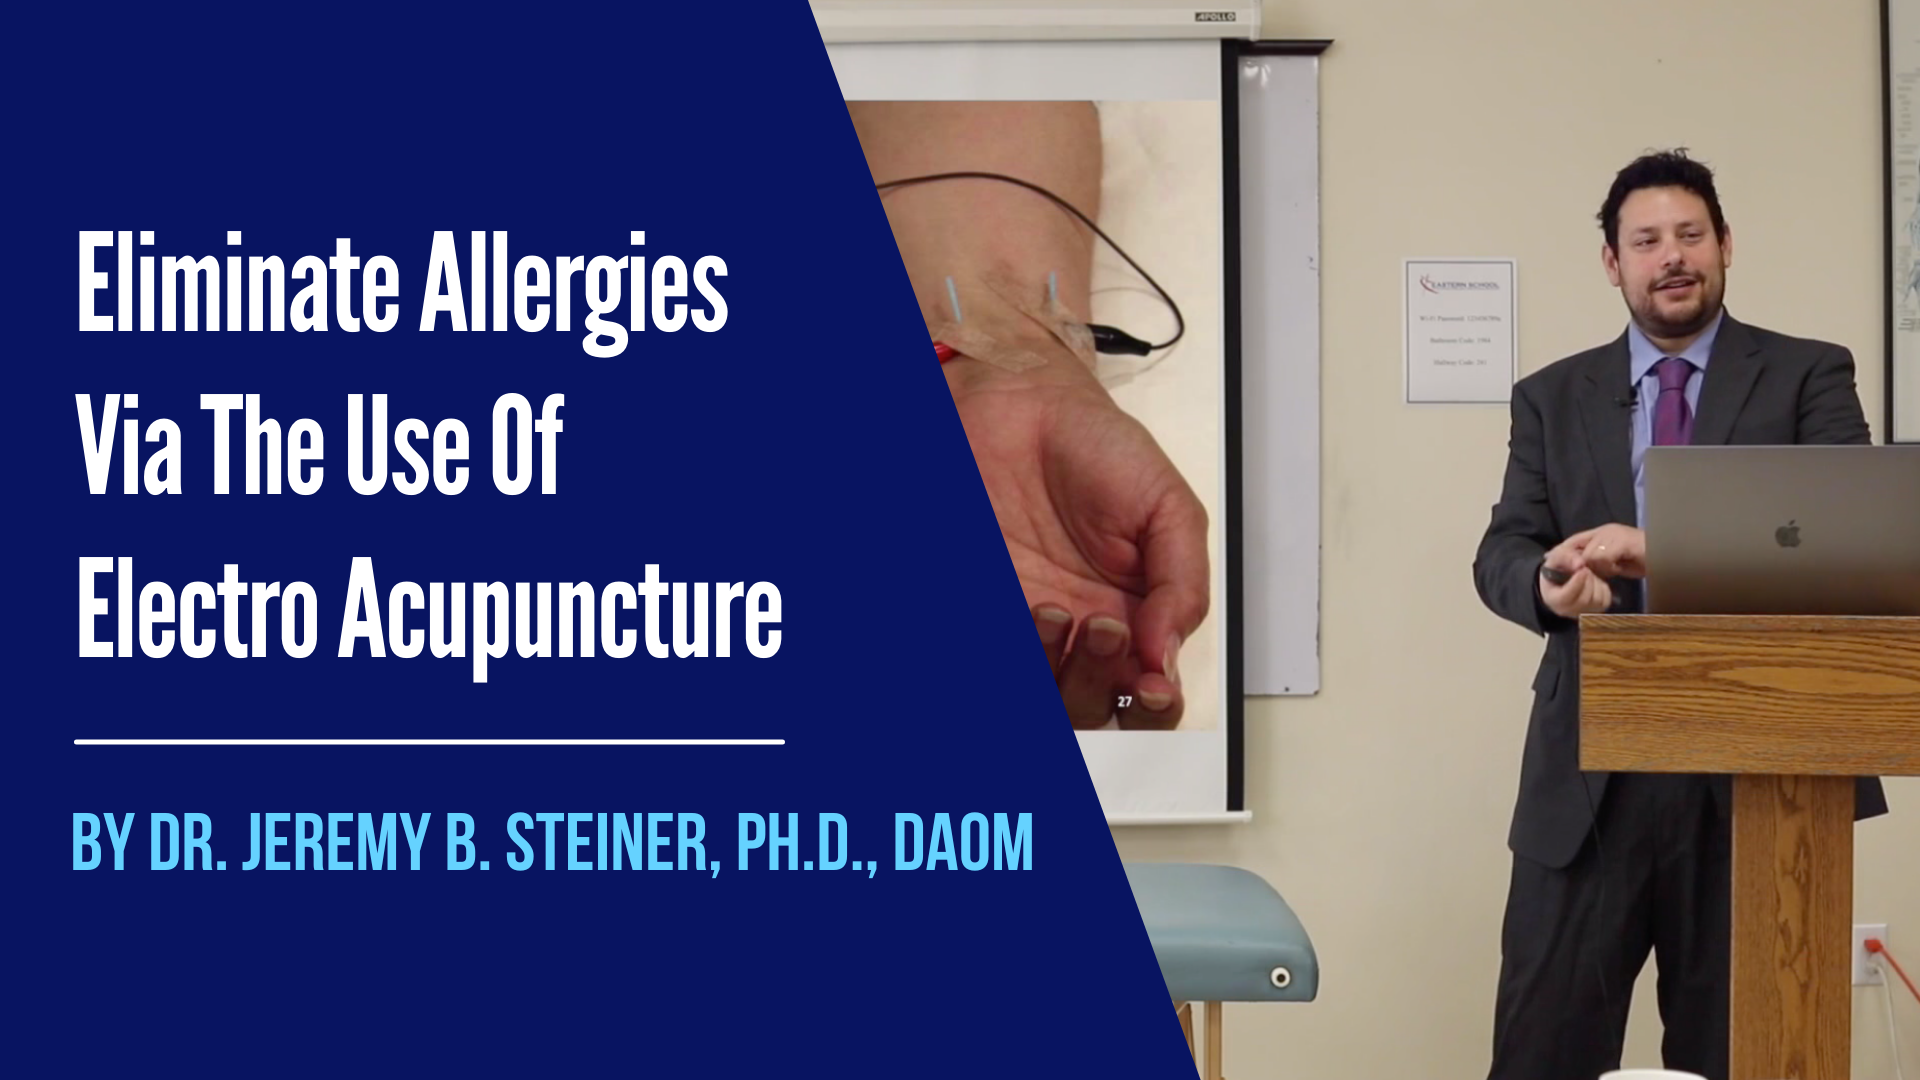 Eliminate Allergies Via the Use of Electro-Acupuncture